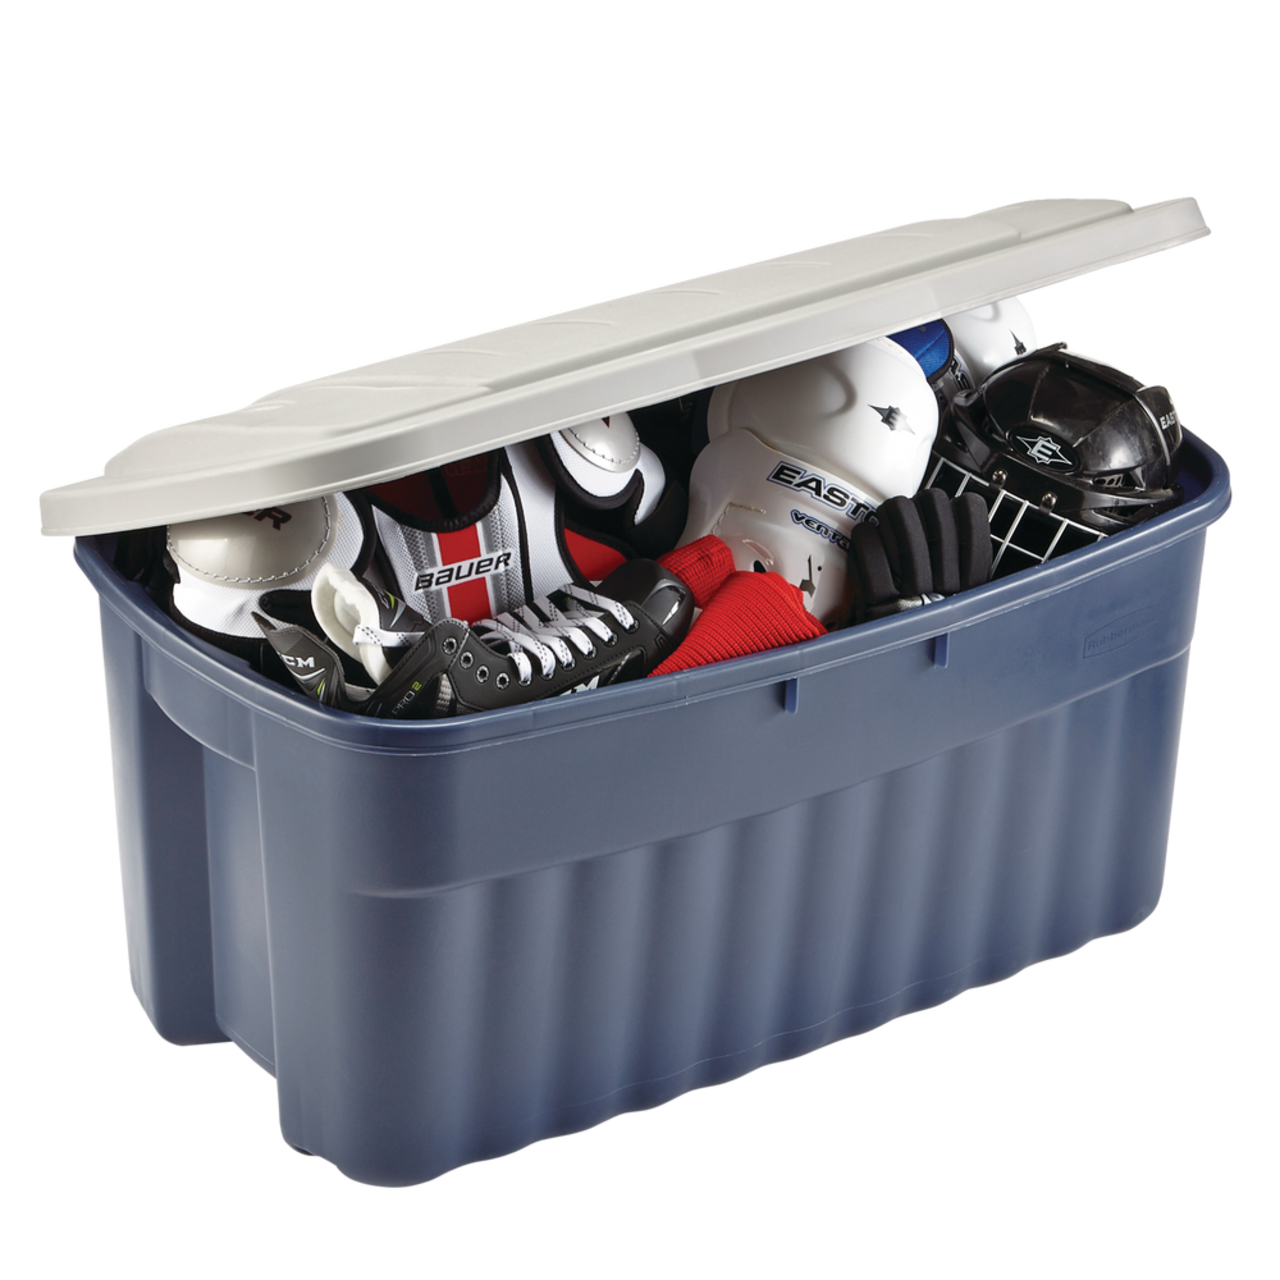 https://media-www.canadiantire.ca/product/living/home-organization/storage-containers/0423432/hinge-top-tote-151l-852708a3-ba21-40db-88c3-a6d0b7bc9c5b.png?imdensity=1&imwidth=1244&impolicy=mZoom